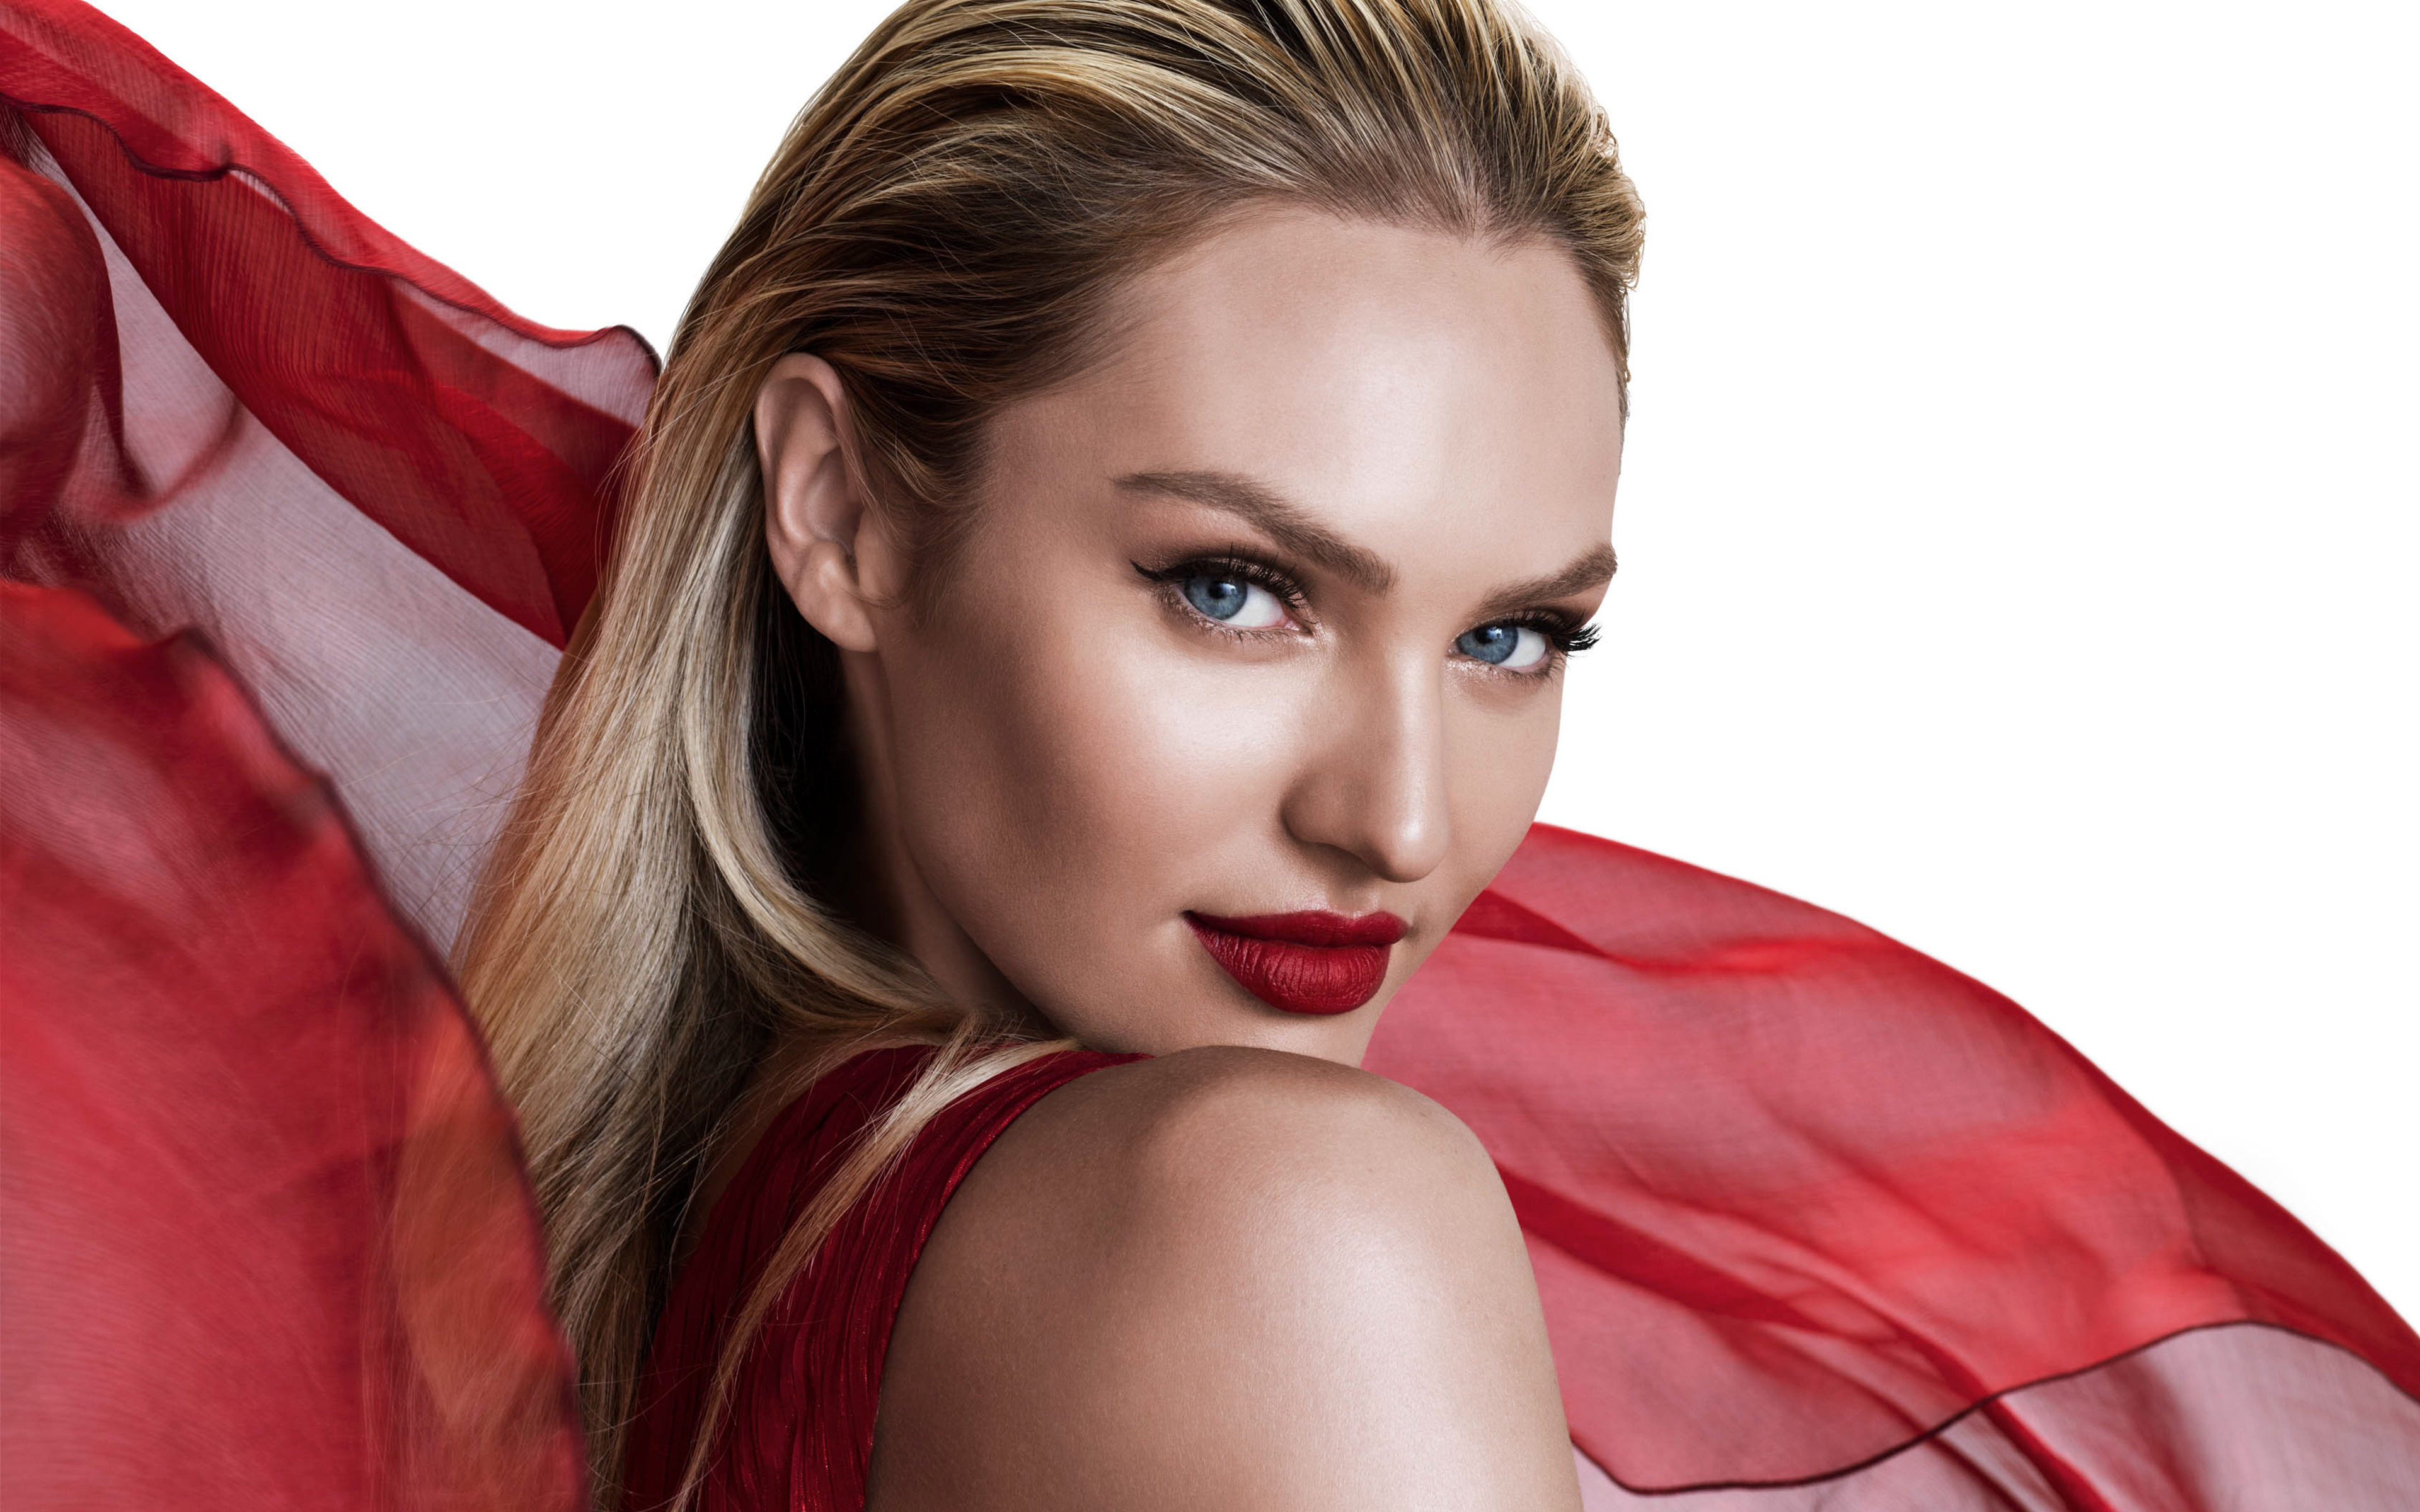 Candice Swanepoel 2018 4K Wallpapers